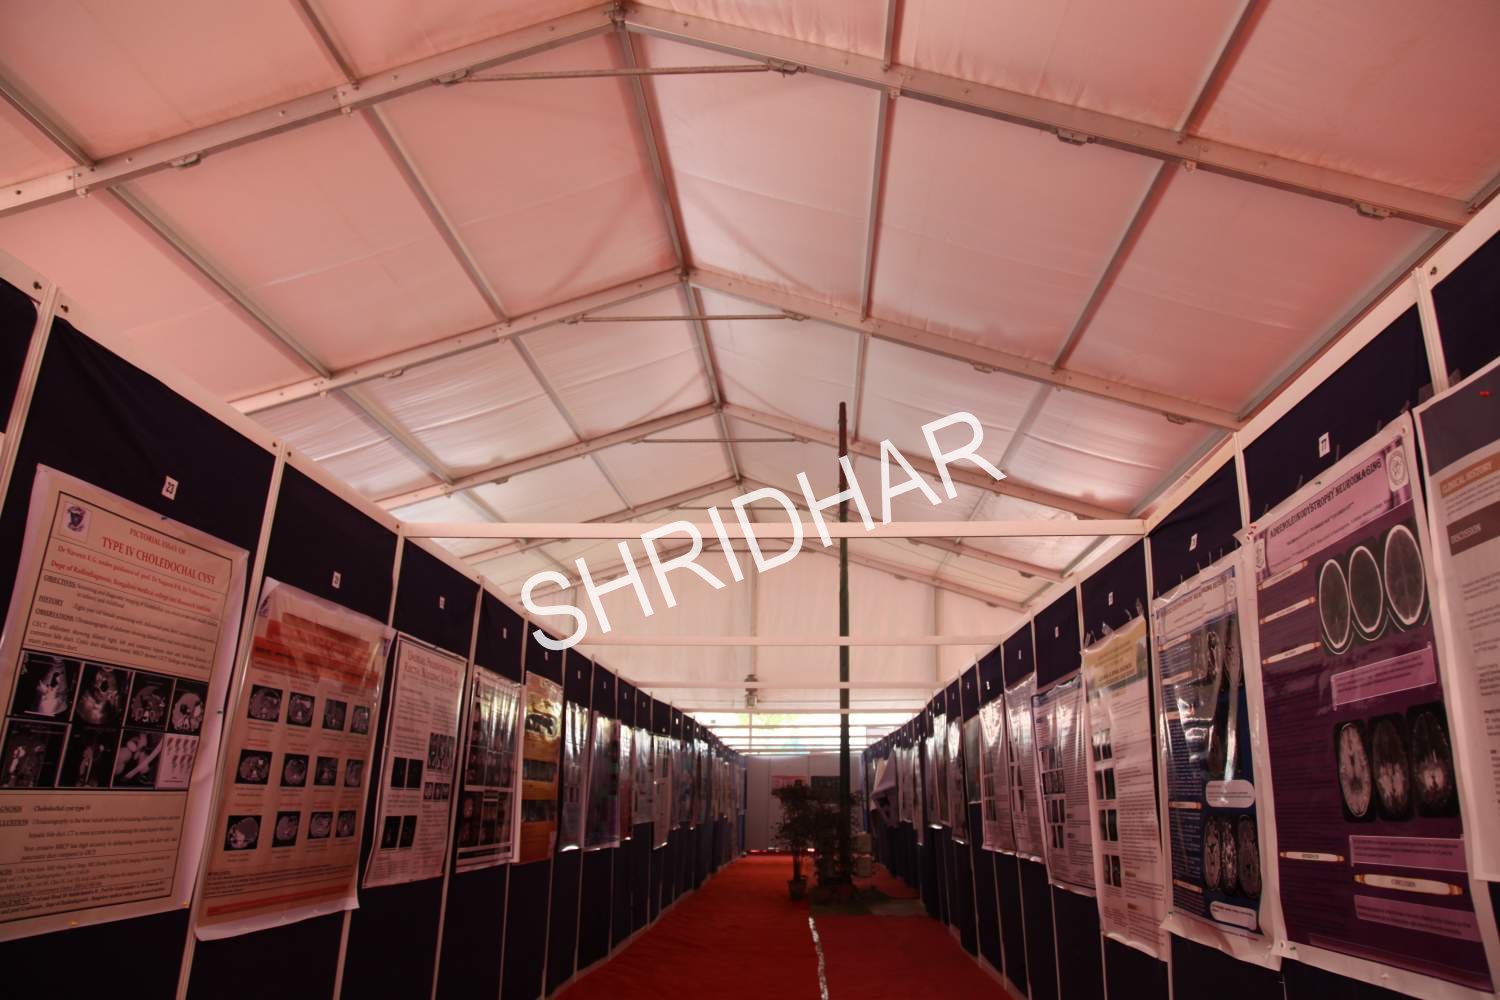 tent house supplier services tent house dealer in bangalore for exhibitions events shridhar tent house